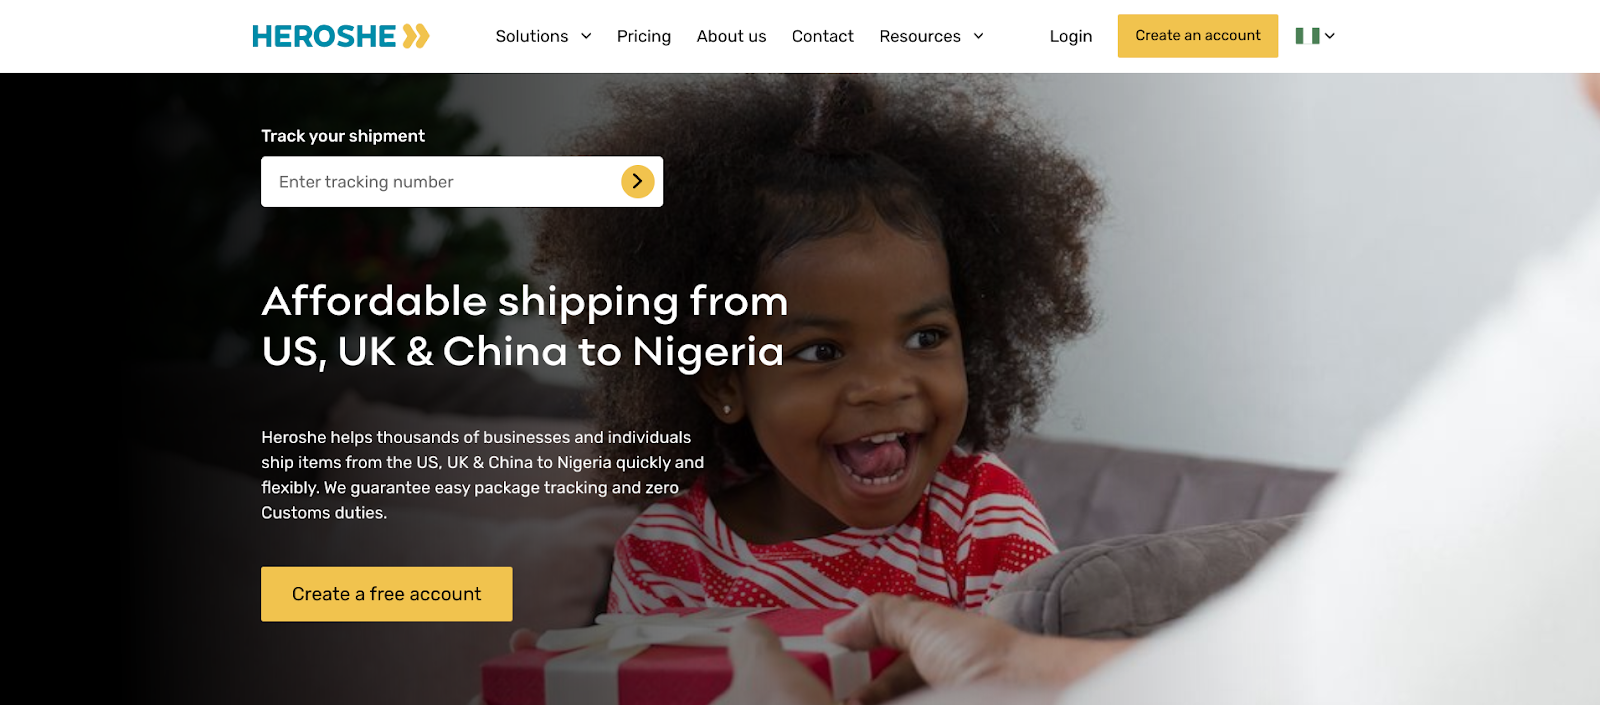 Affordable shipping from US, UK & China to Nigeria